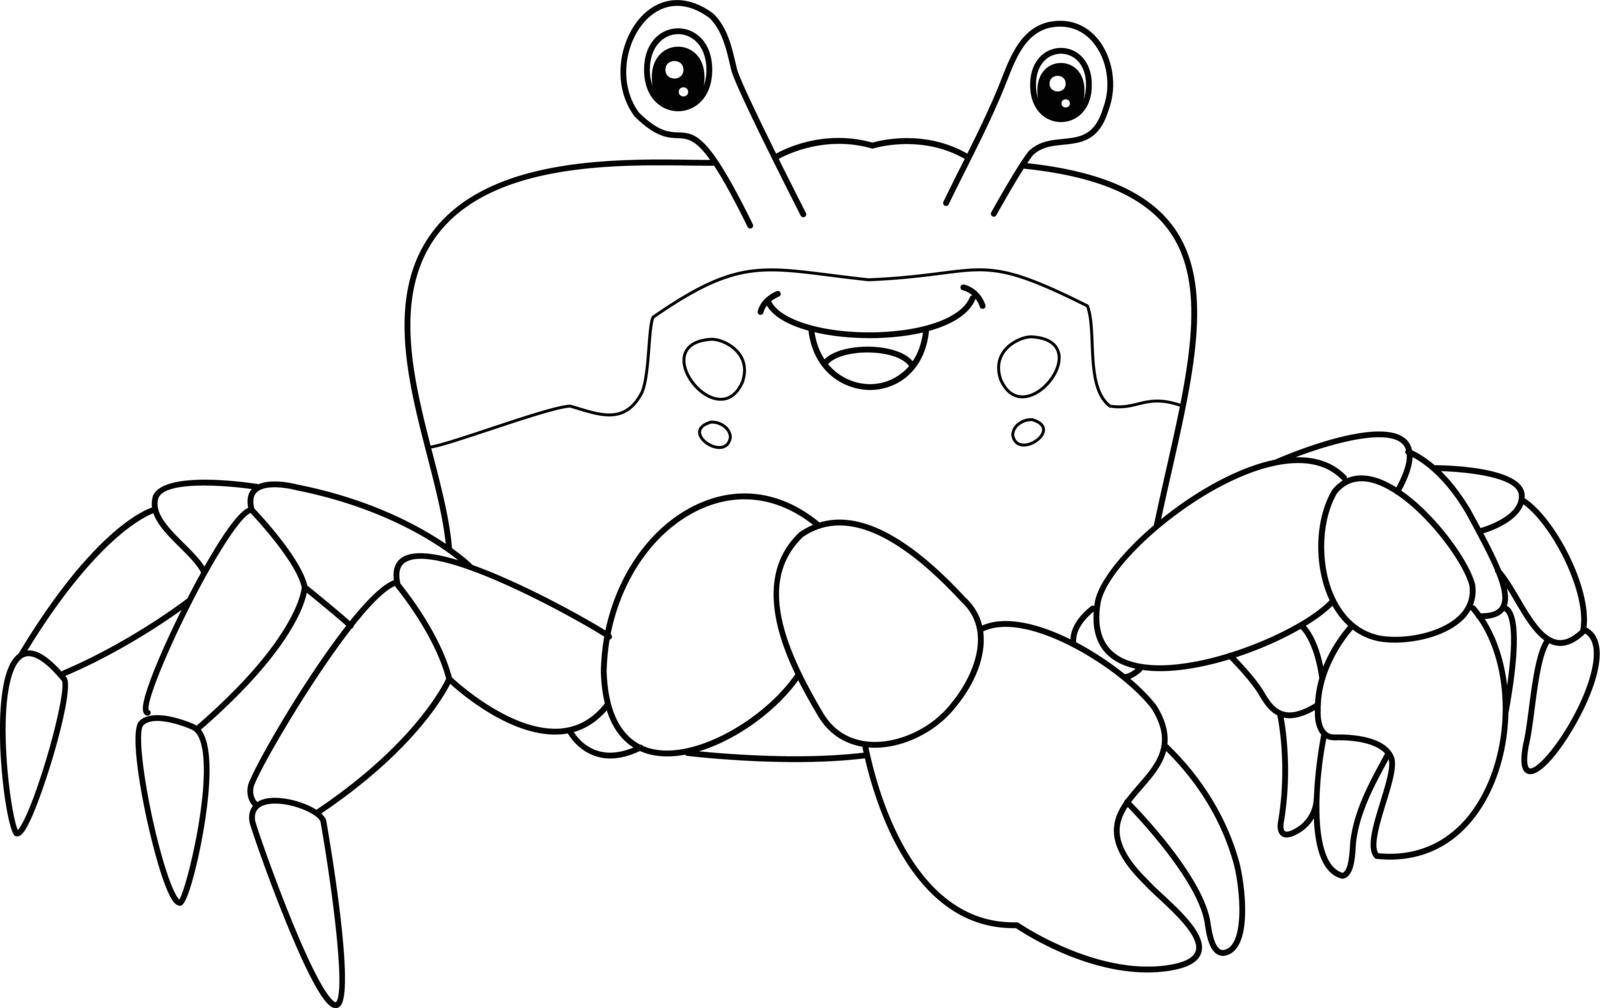 A cute and funny coloring page of a red Jamaican crab. Provides hours of coloring fun for children. To color, this page is very easy. Suitable for little kids and toddlers.